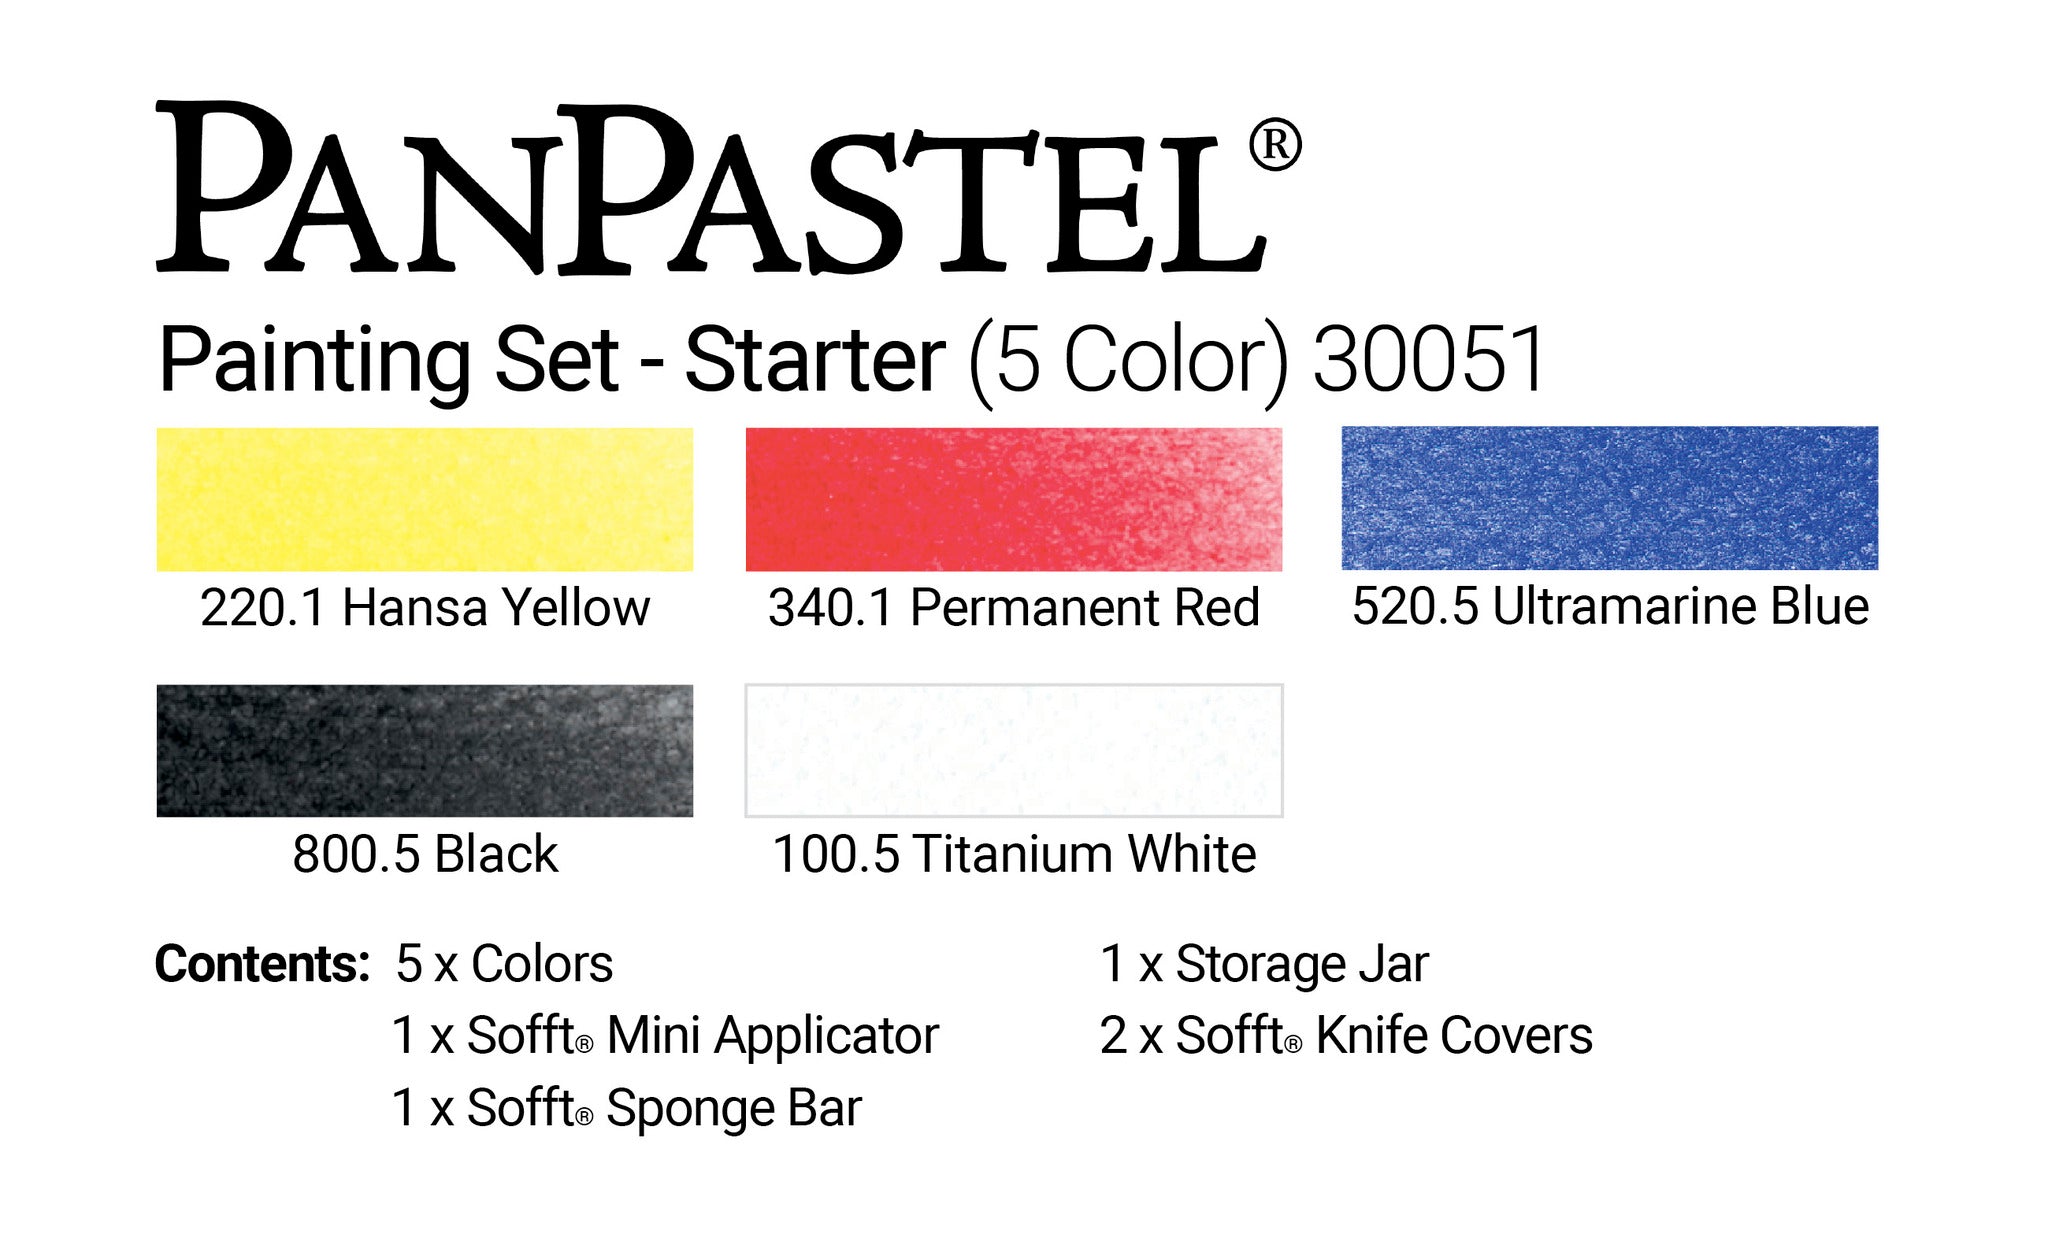 PanPastel 5 Colour Starter Set Painting 30051 & Sofft Tools, this is a perfect little starter set, to experiment and work with PanPastel, the set contains primary colours and black and with for lightening and tinting